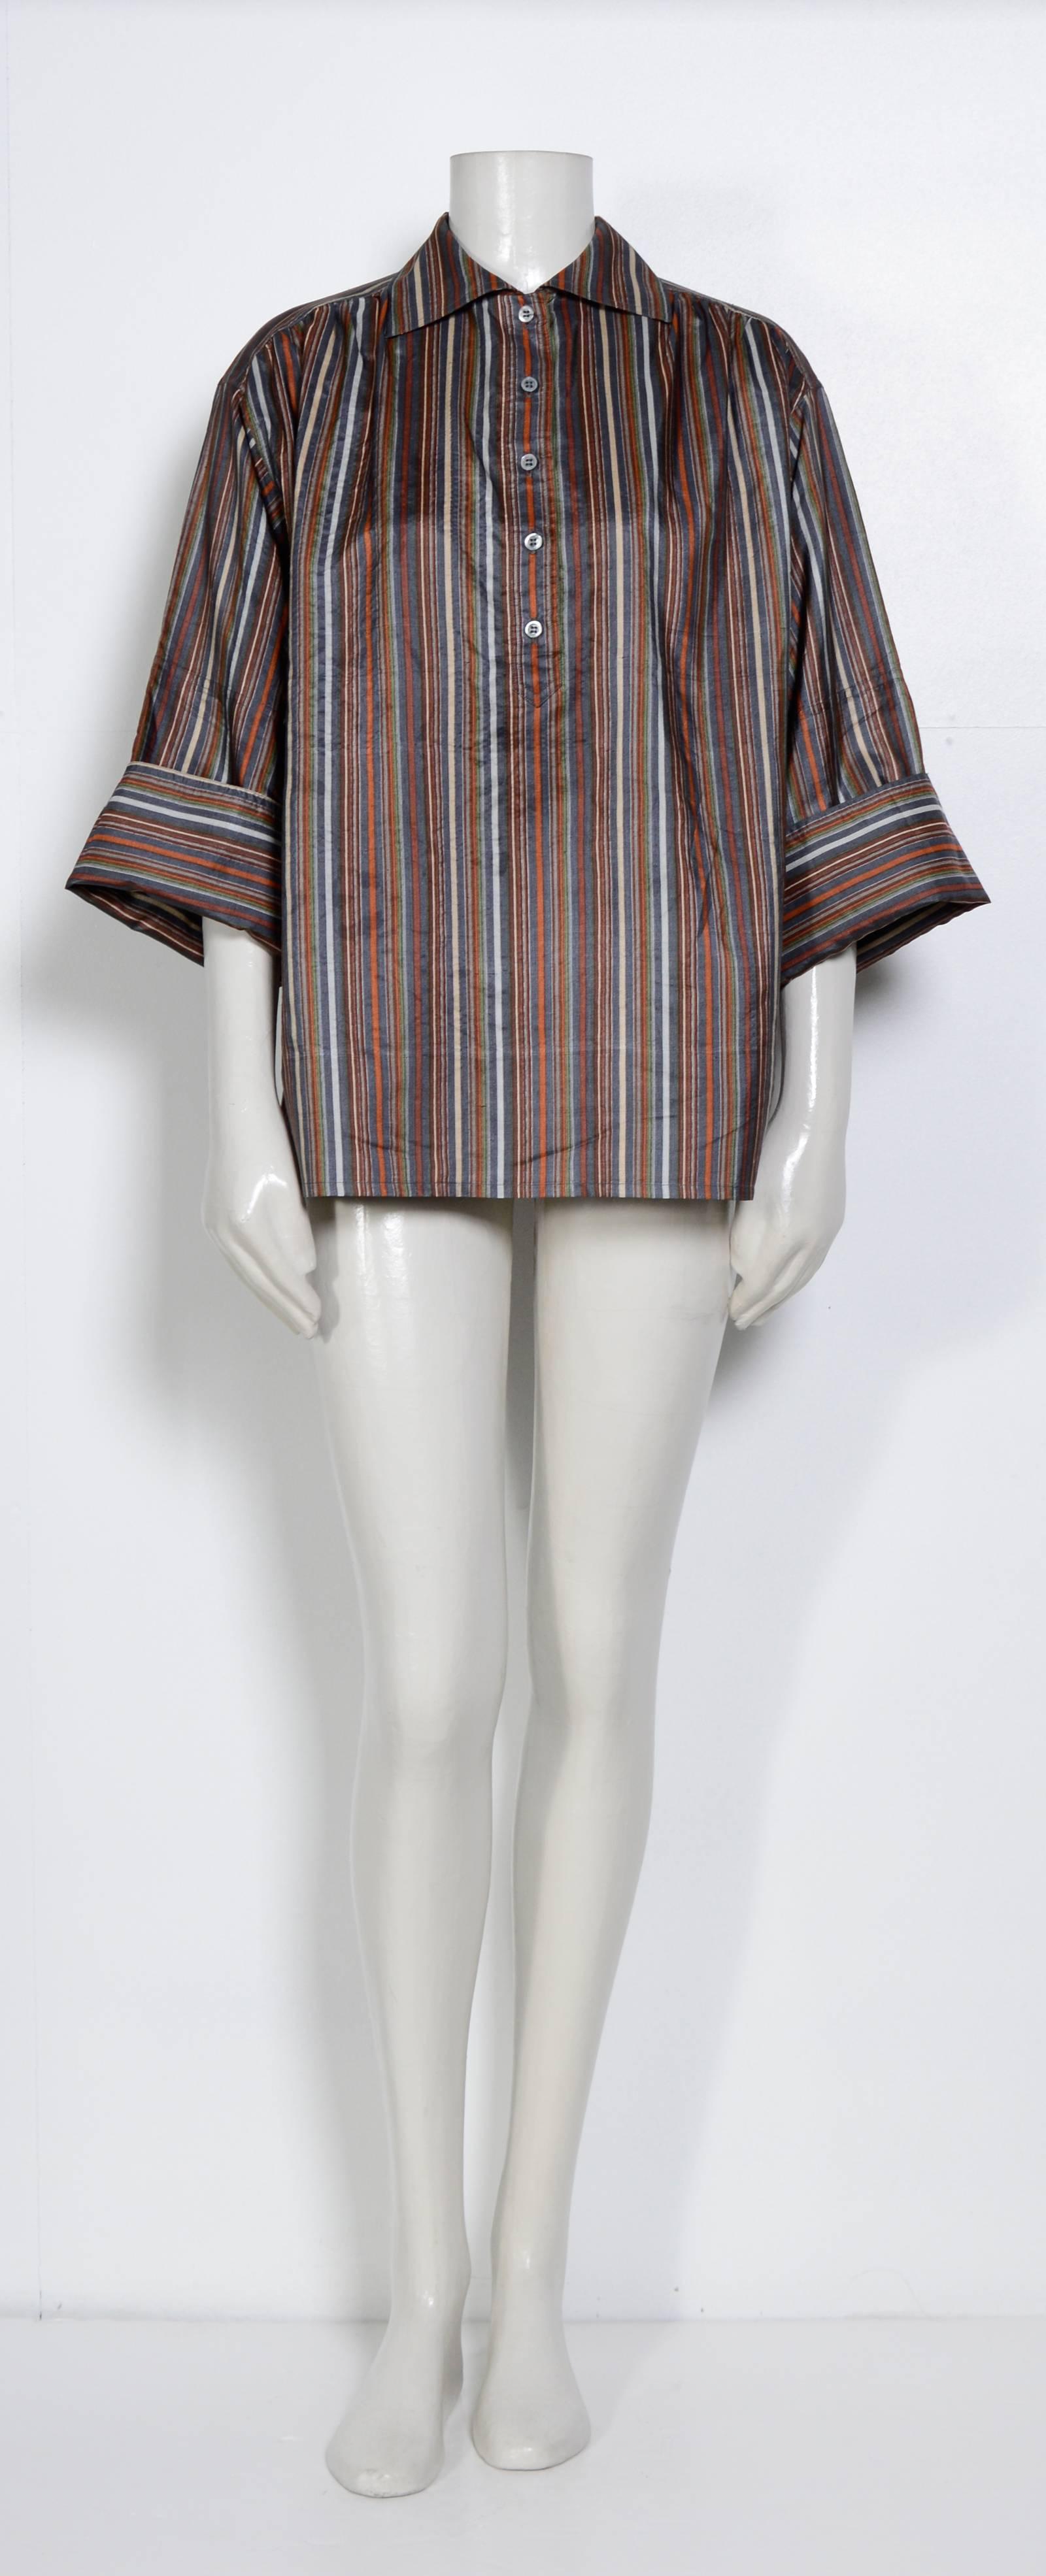 70's Silk Striped Blouse & Skirt Set  by Yves St Laurent "Rive Gauche"
French Size 38
Excellent condition
Measurements taken flat:
Top: Sh to Sh 19inch/48cm - Ua to Ua 25inch/63cm 
Skirt: Waist 13inch - 33cm  